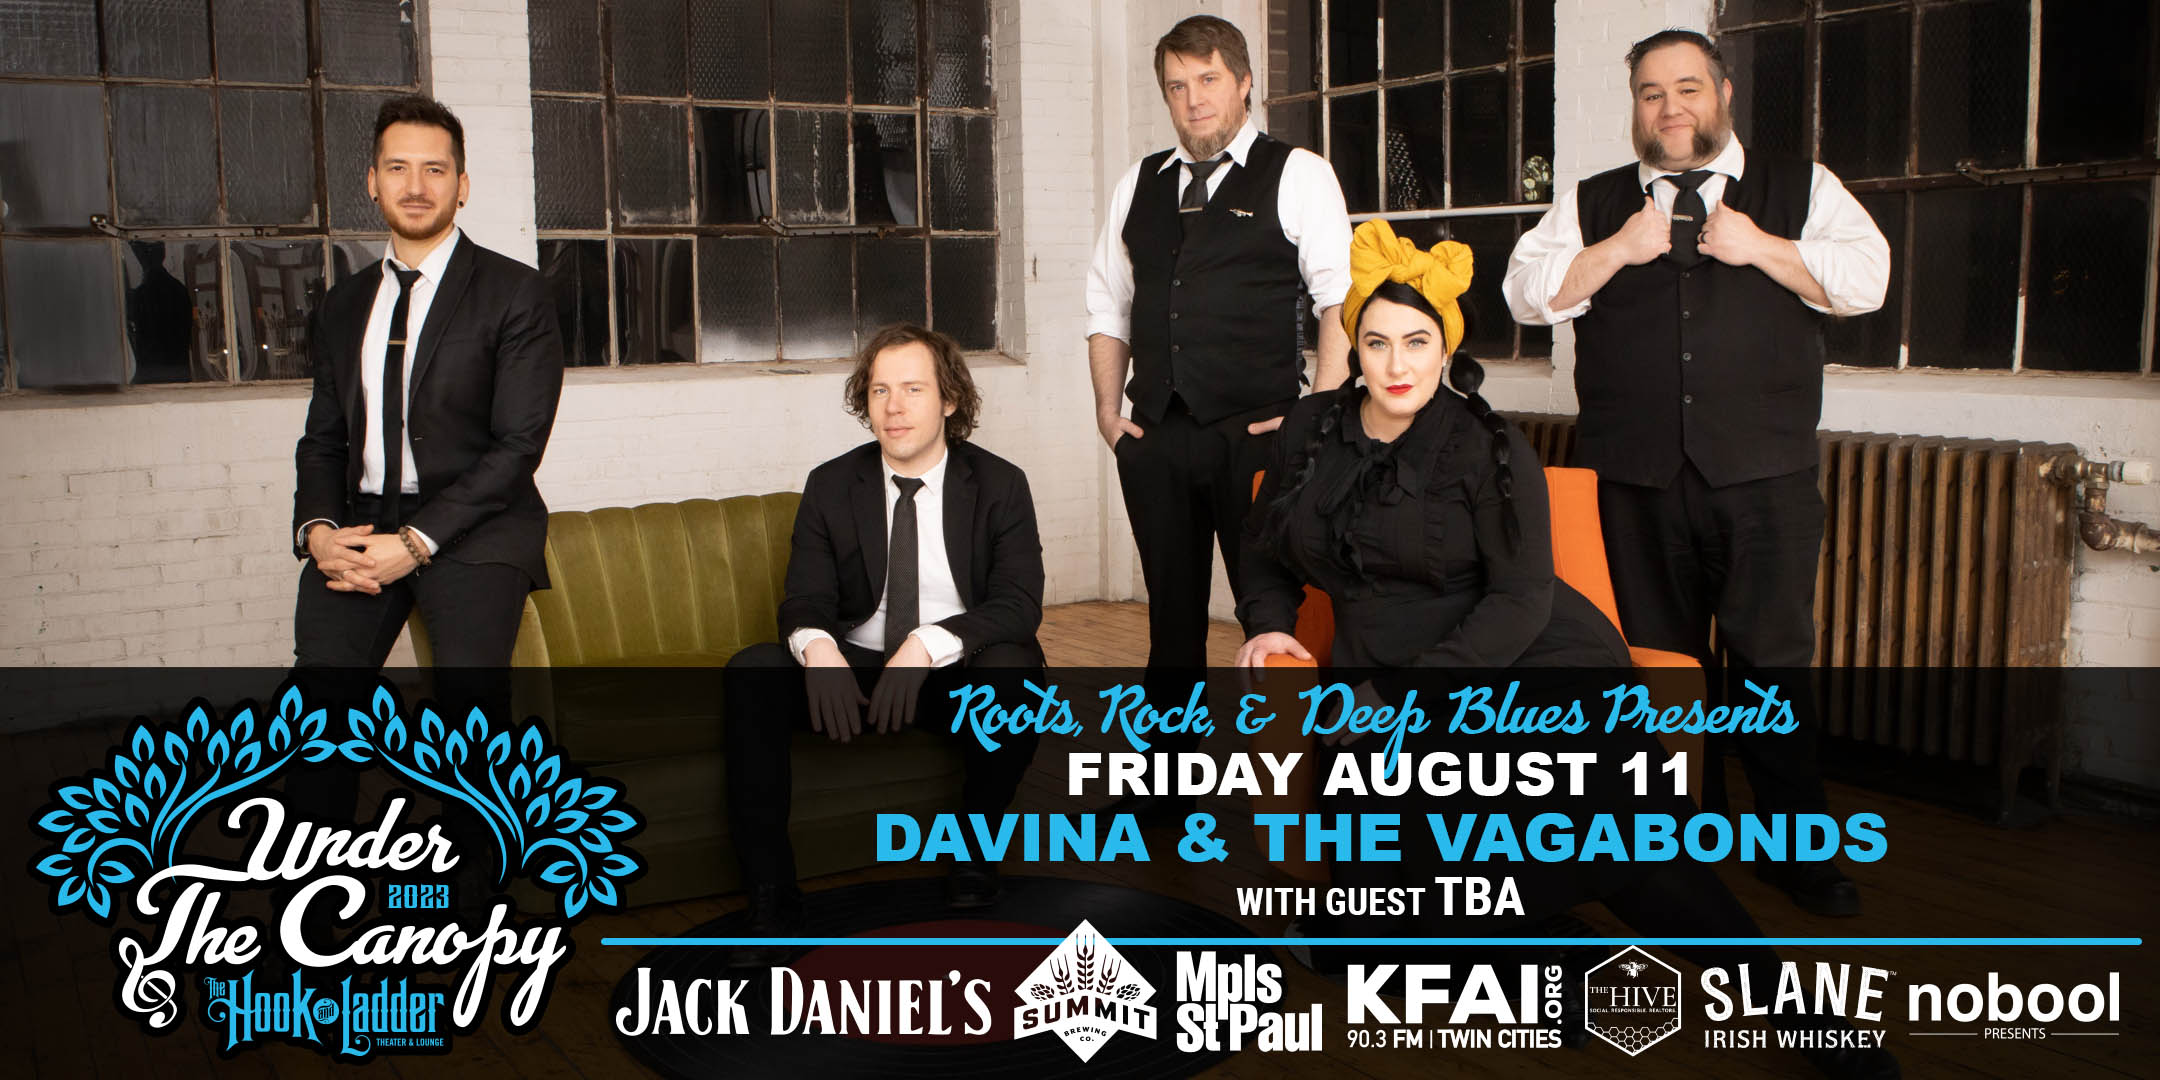 Davina & The Vagabonds - Friday, August 11 Under The Canopy at The Hook and Ladder Theater